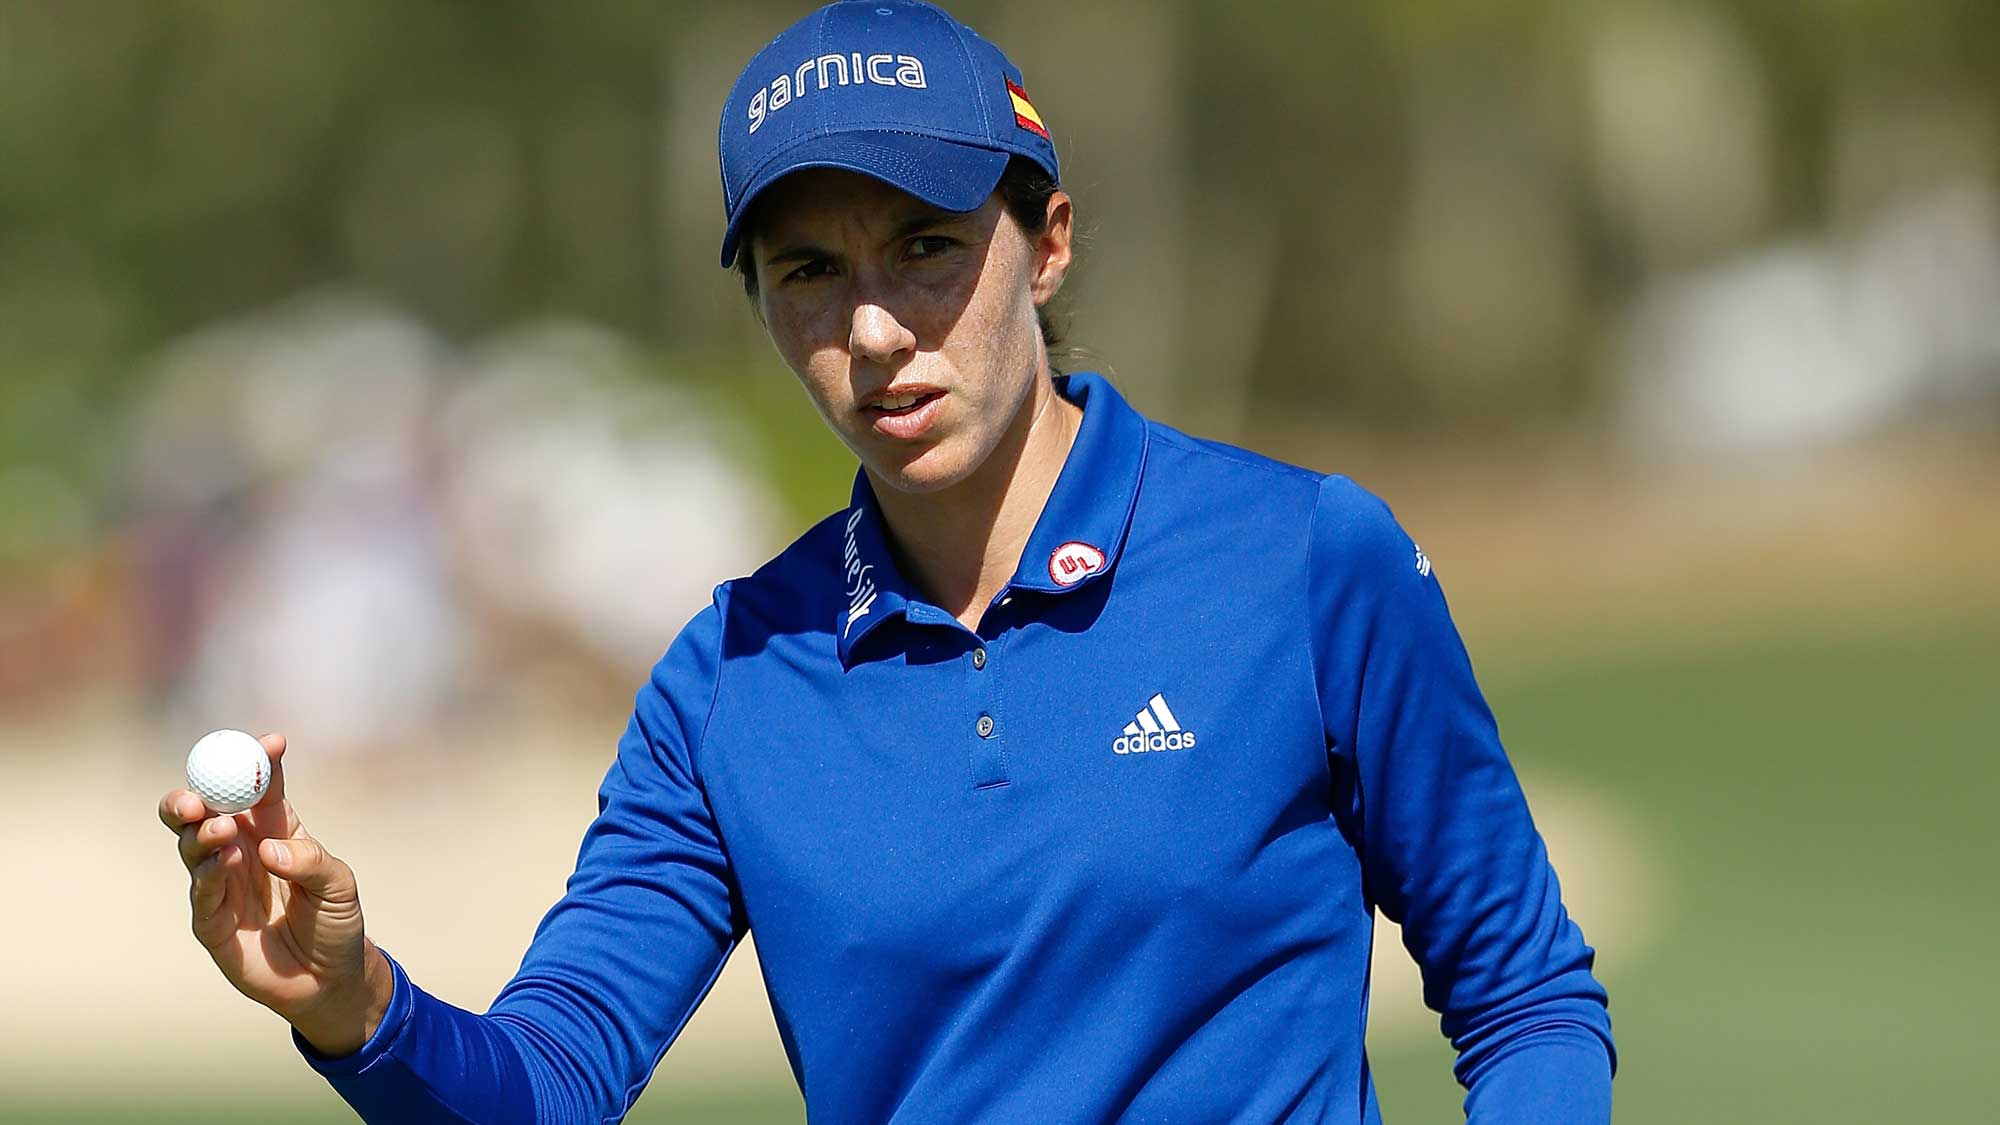 Carlota Ciganda of Spain reacts after a putt on the ninth green during the first round of the CME Group Tour Championship